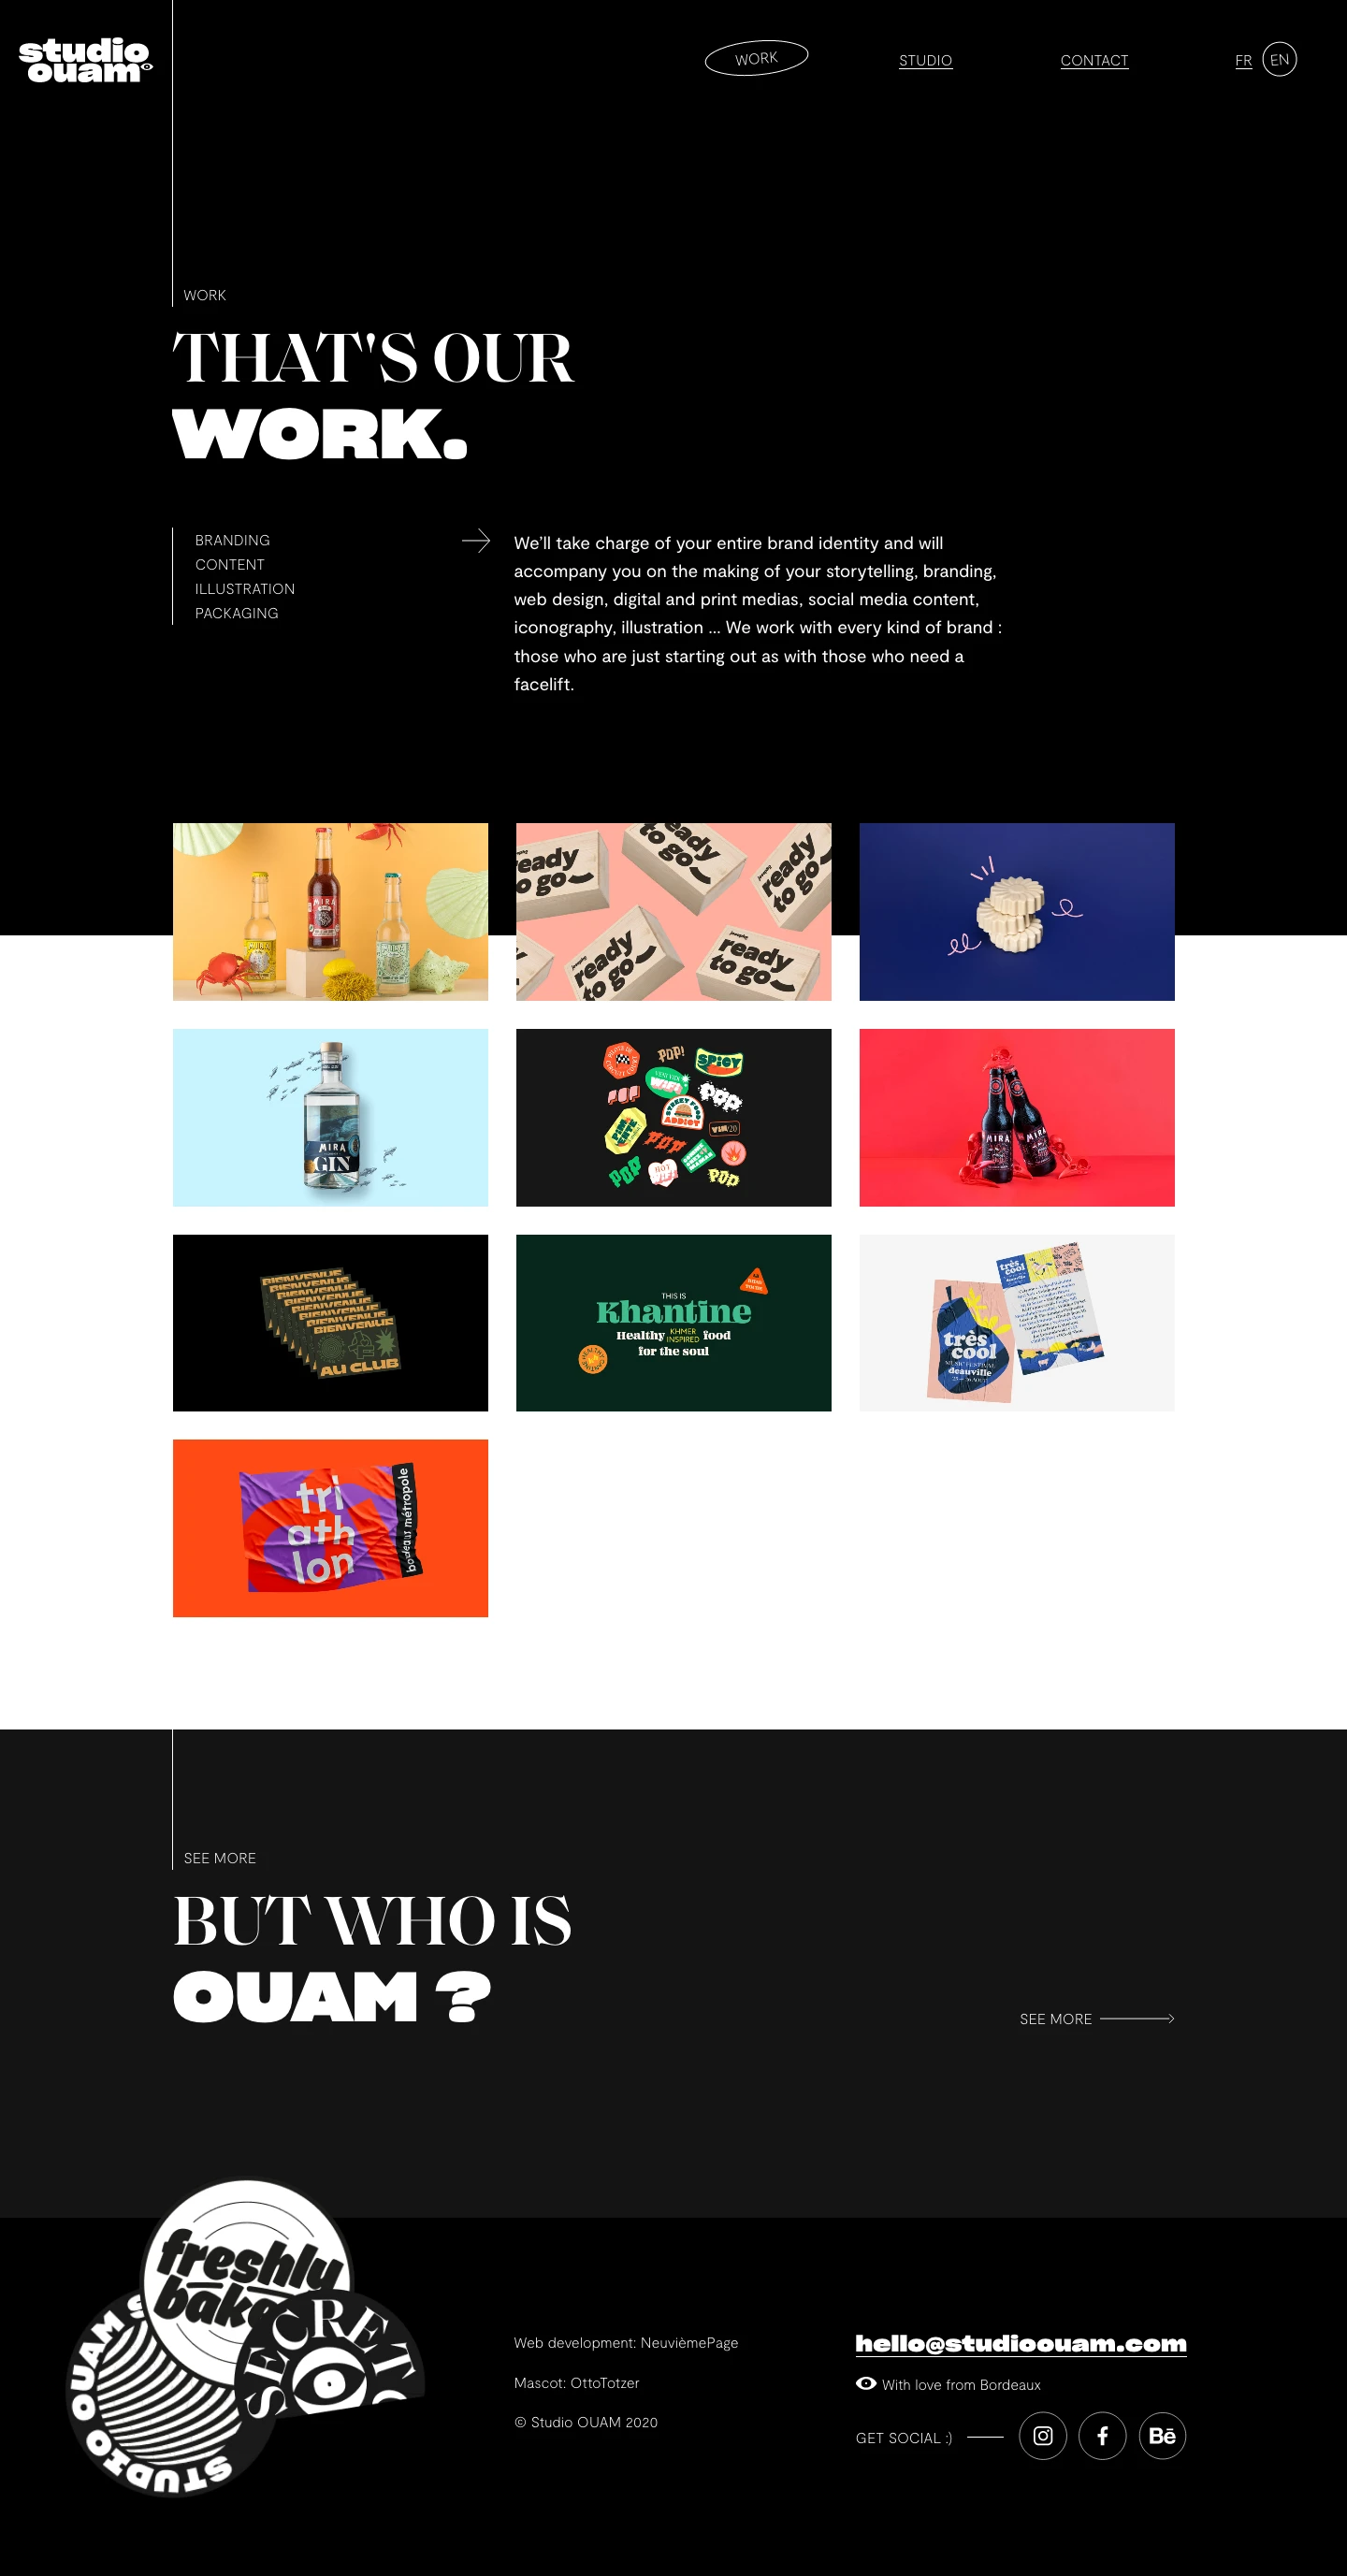 Studio Ouam Landing Page Example: Studio OUAM is a communication agency based between Paris and Bordeaux specialized in visual identity and brand creation.